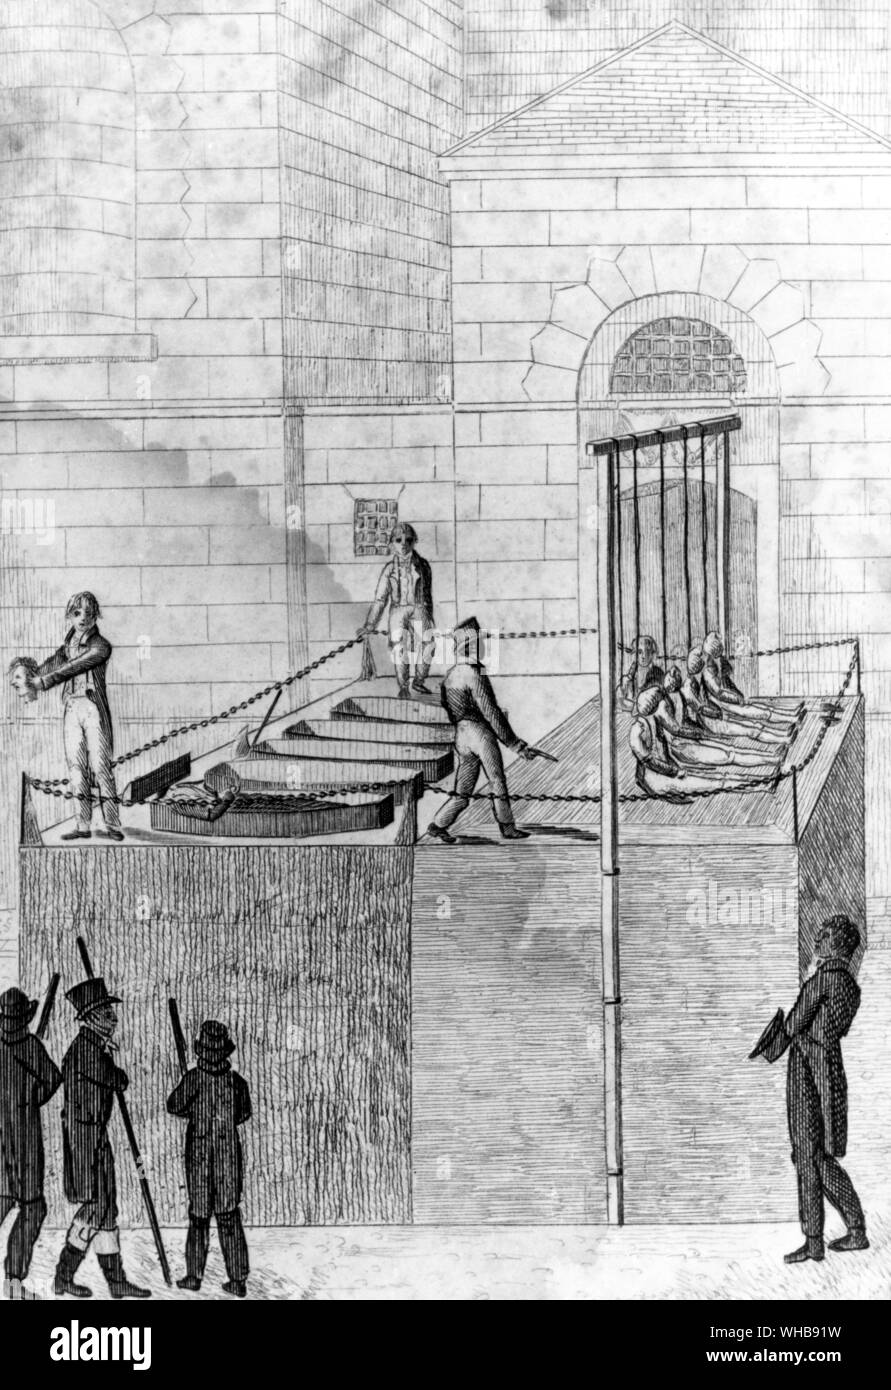 The Execution of the Cato Street Conspirators - 1 May 1820 from an engraving at Kensington Palace, London.  The planned murder of the entire cabinet.. Stock Photo